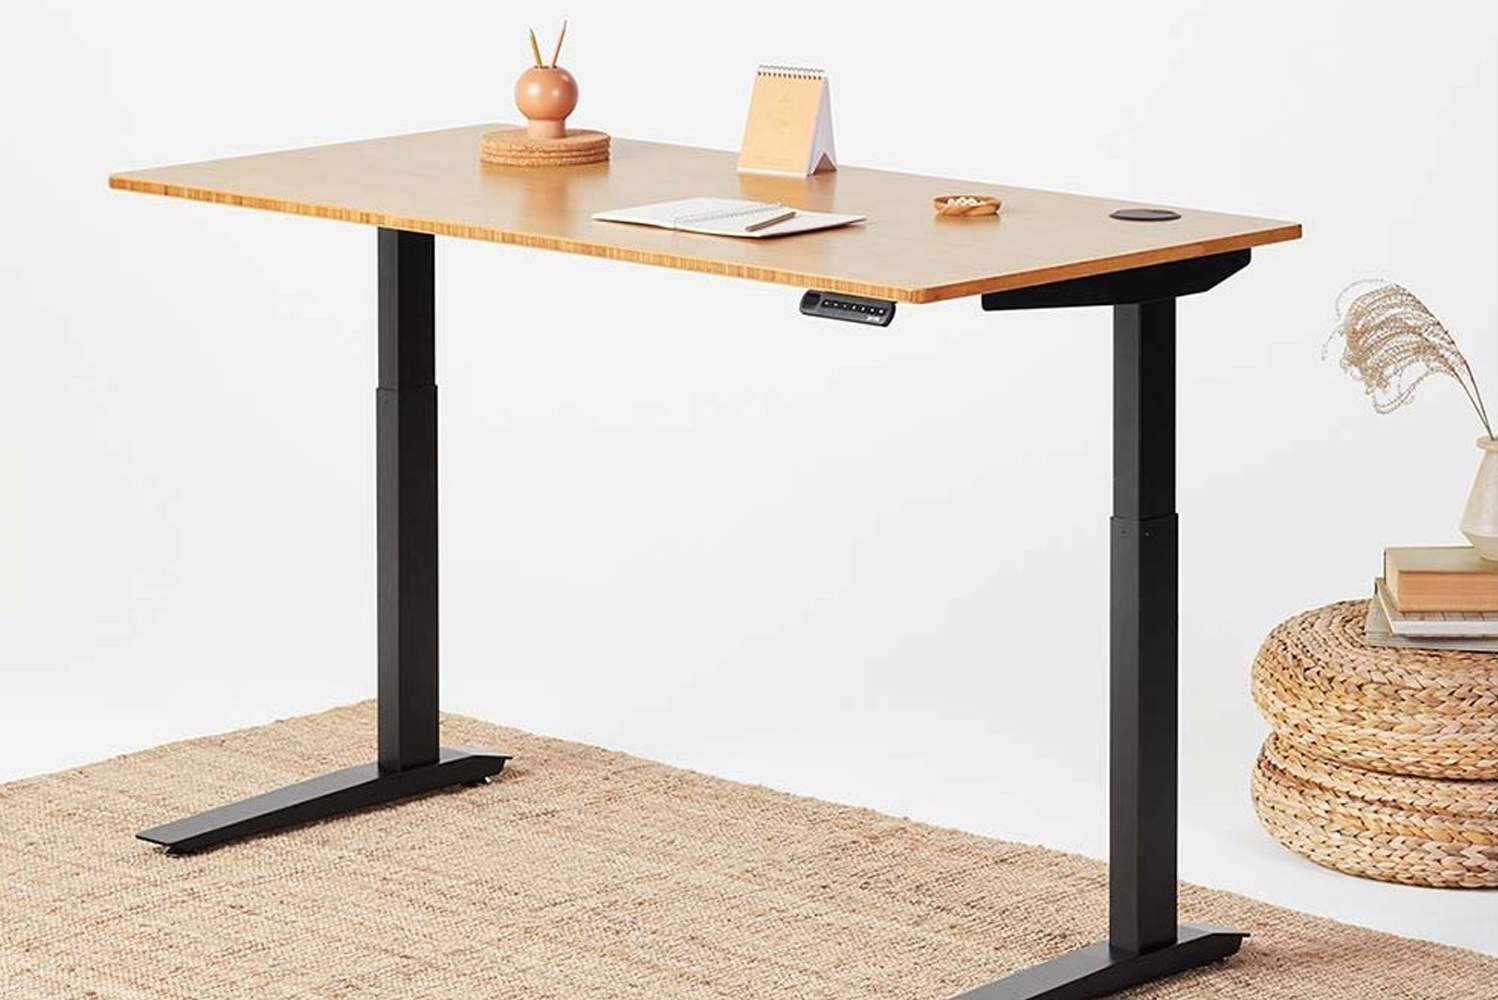 Fully launched the Jarvis adjustable-height standing desk